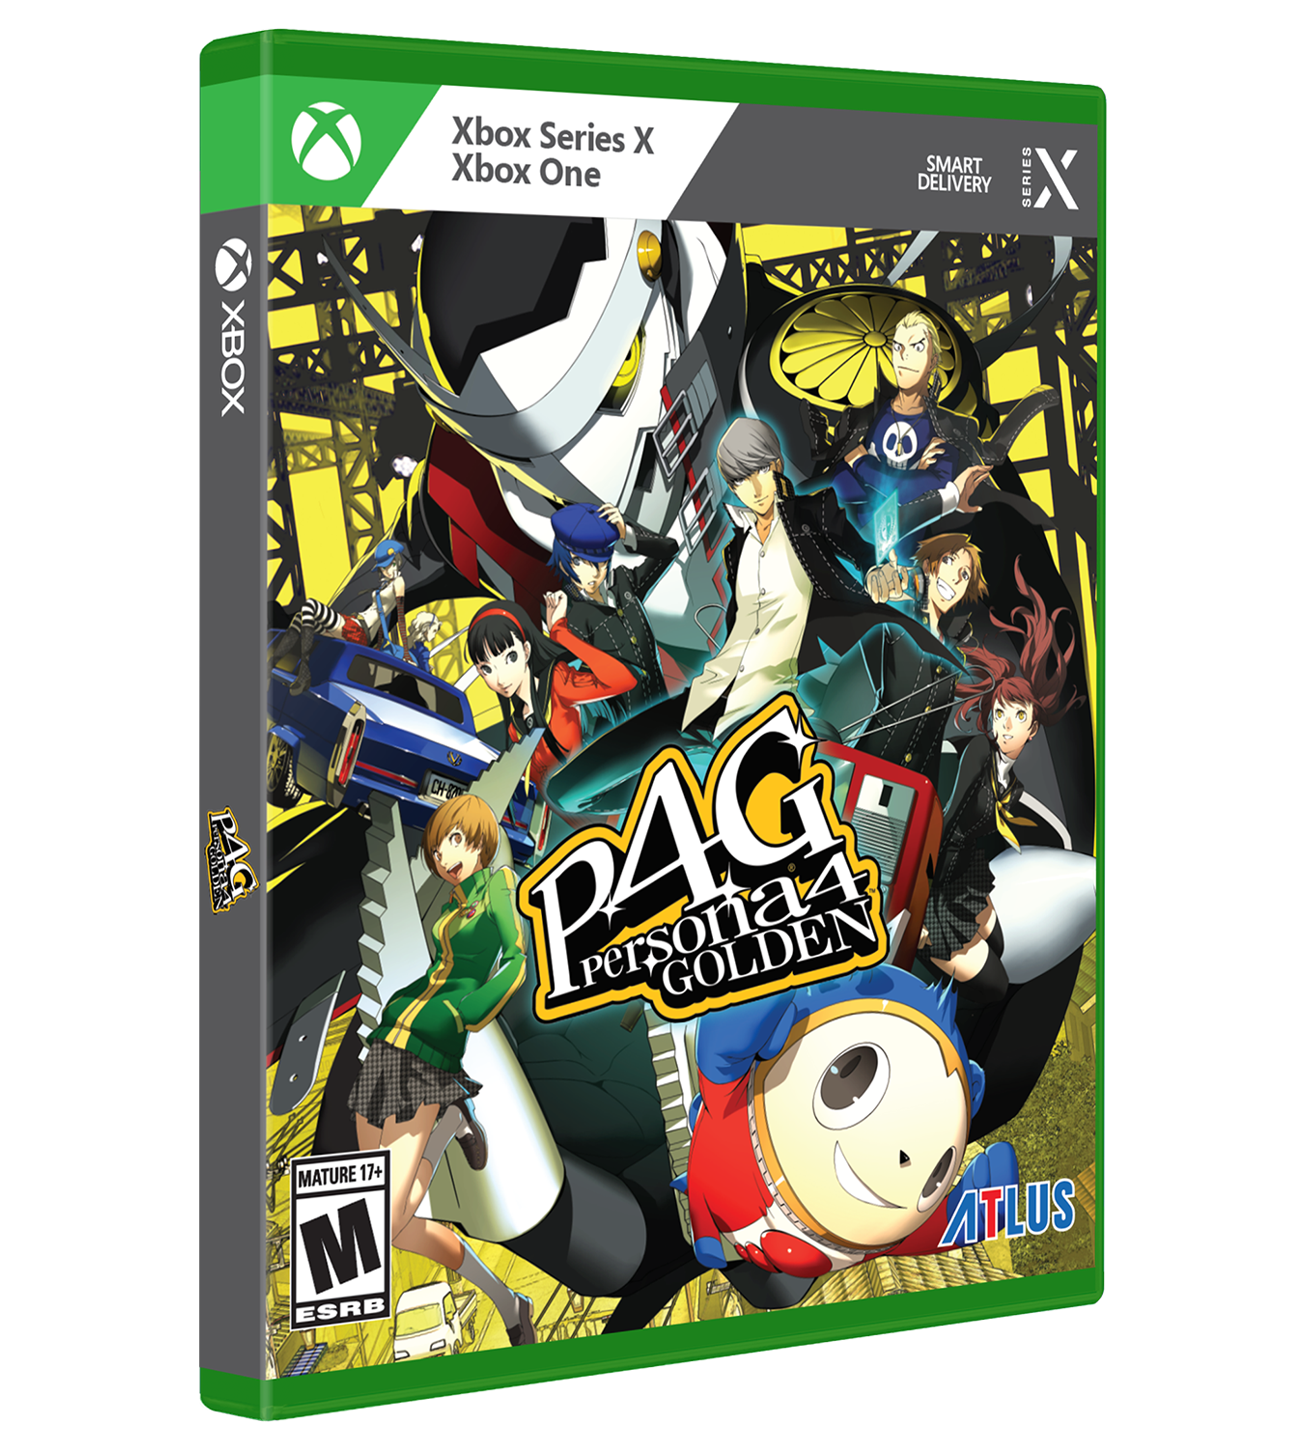 Xbox Limited Run #11: Persona 4 Golden Grimoire Edition – Limited Run Games